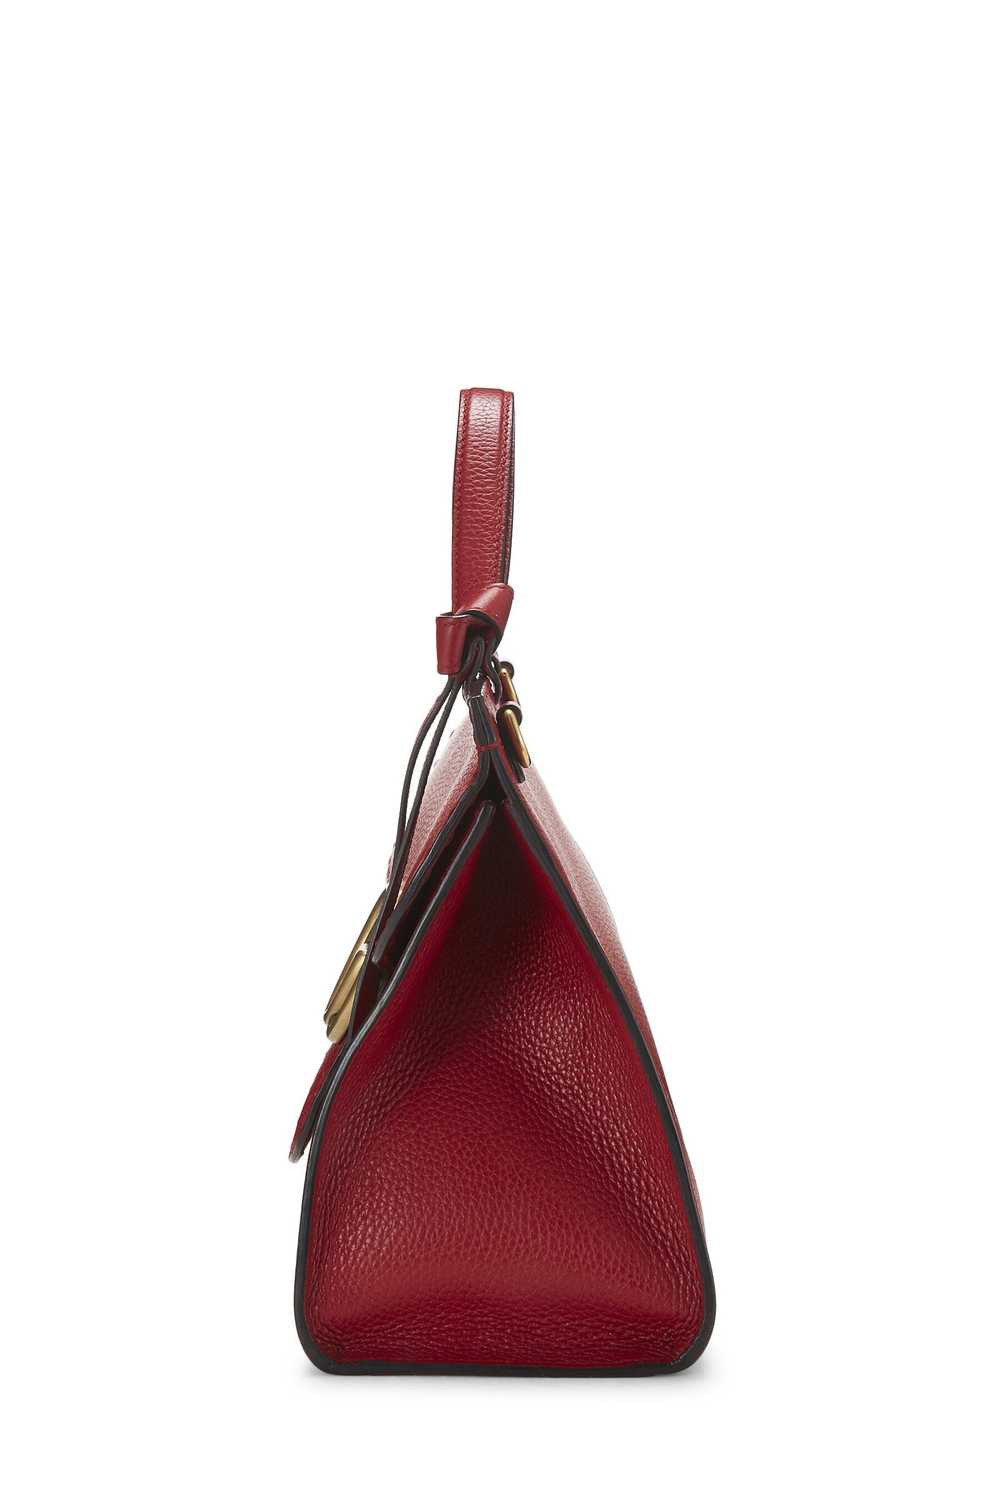 Red Leather GG Marmont Top Handle Flap Bag Small - image 3